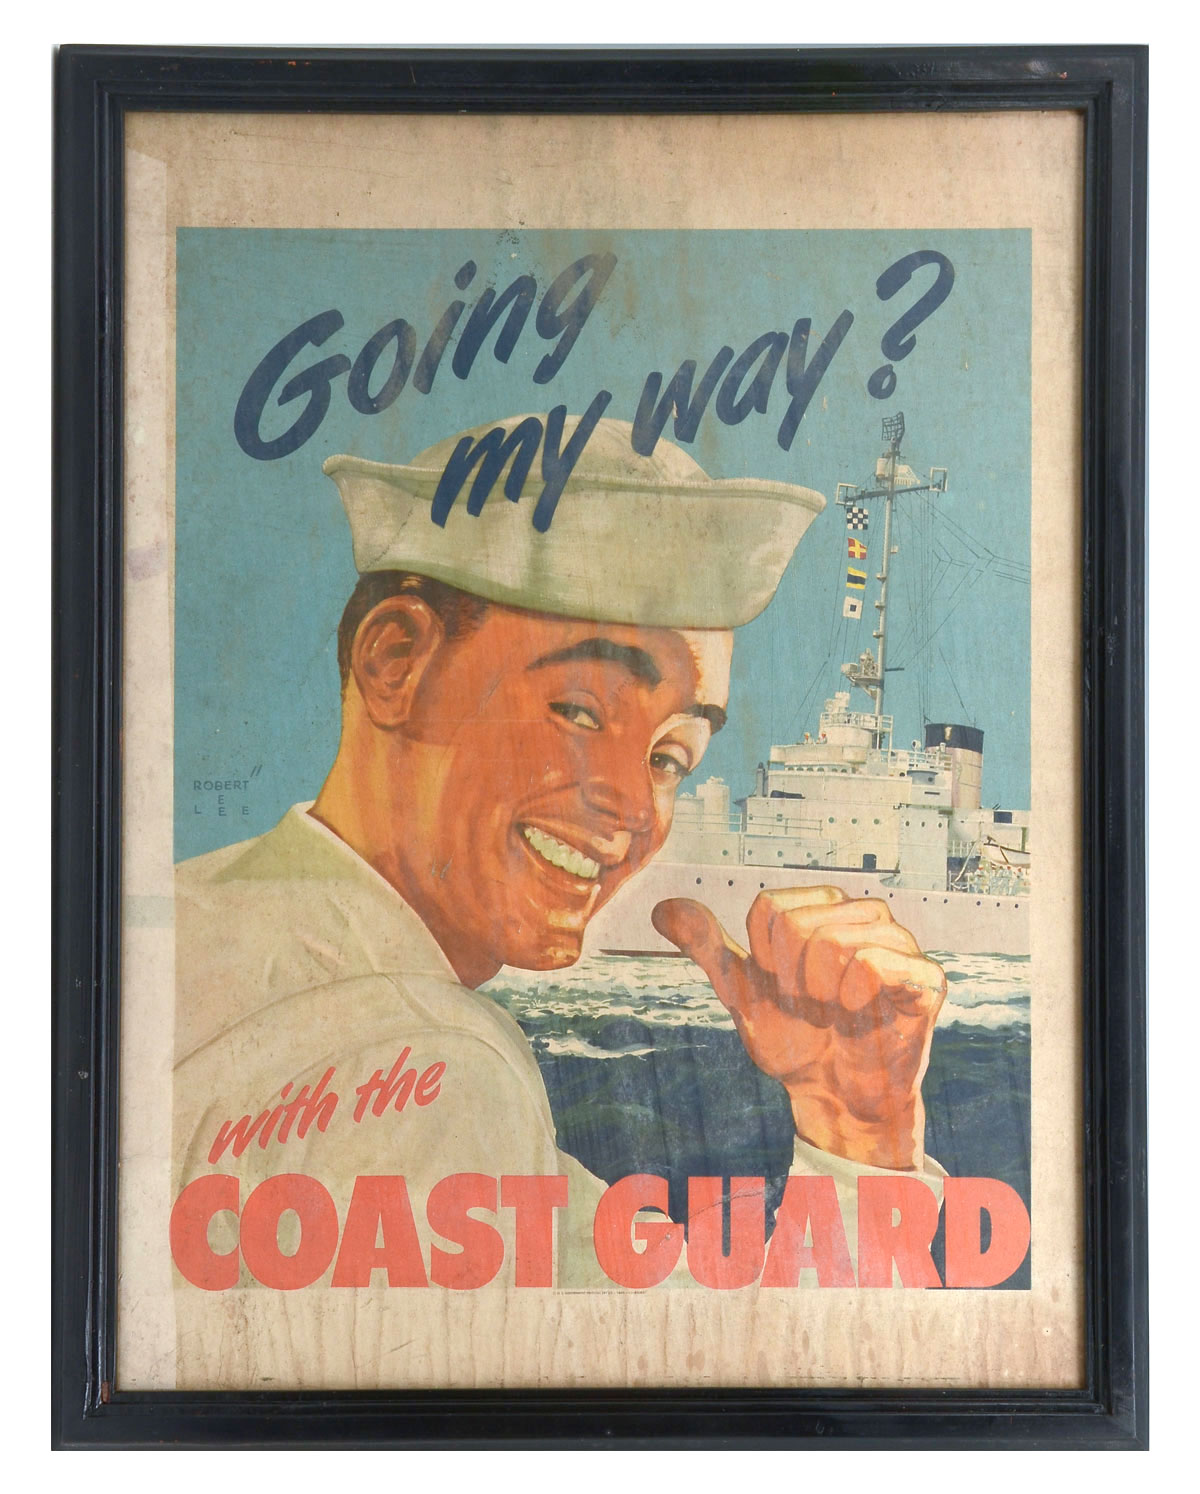 US COAST GUARD GOING MY WAY? POSTER: